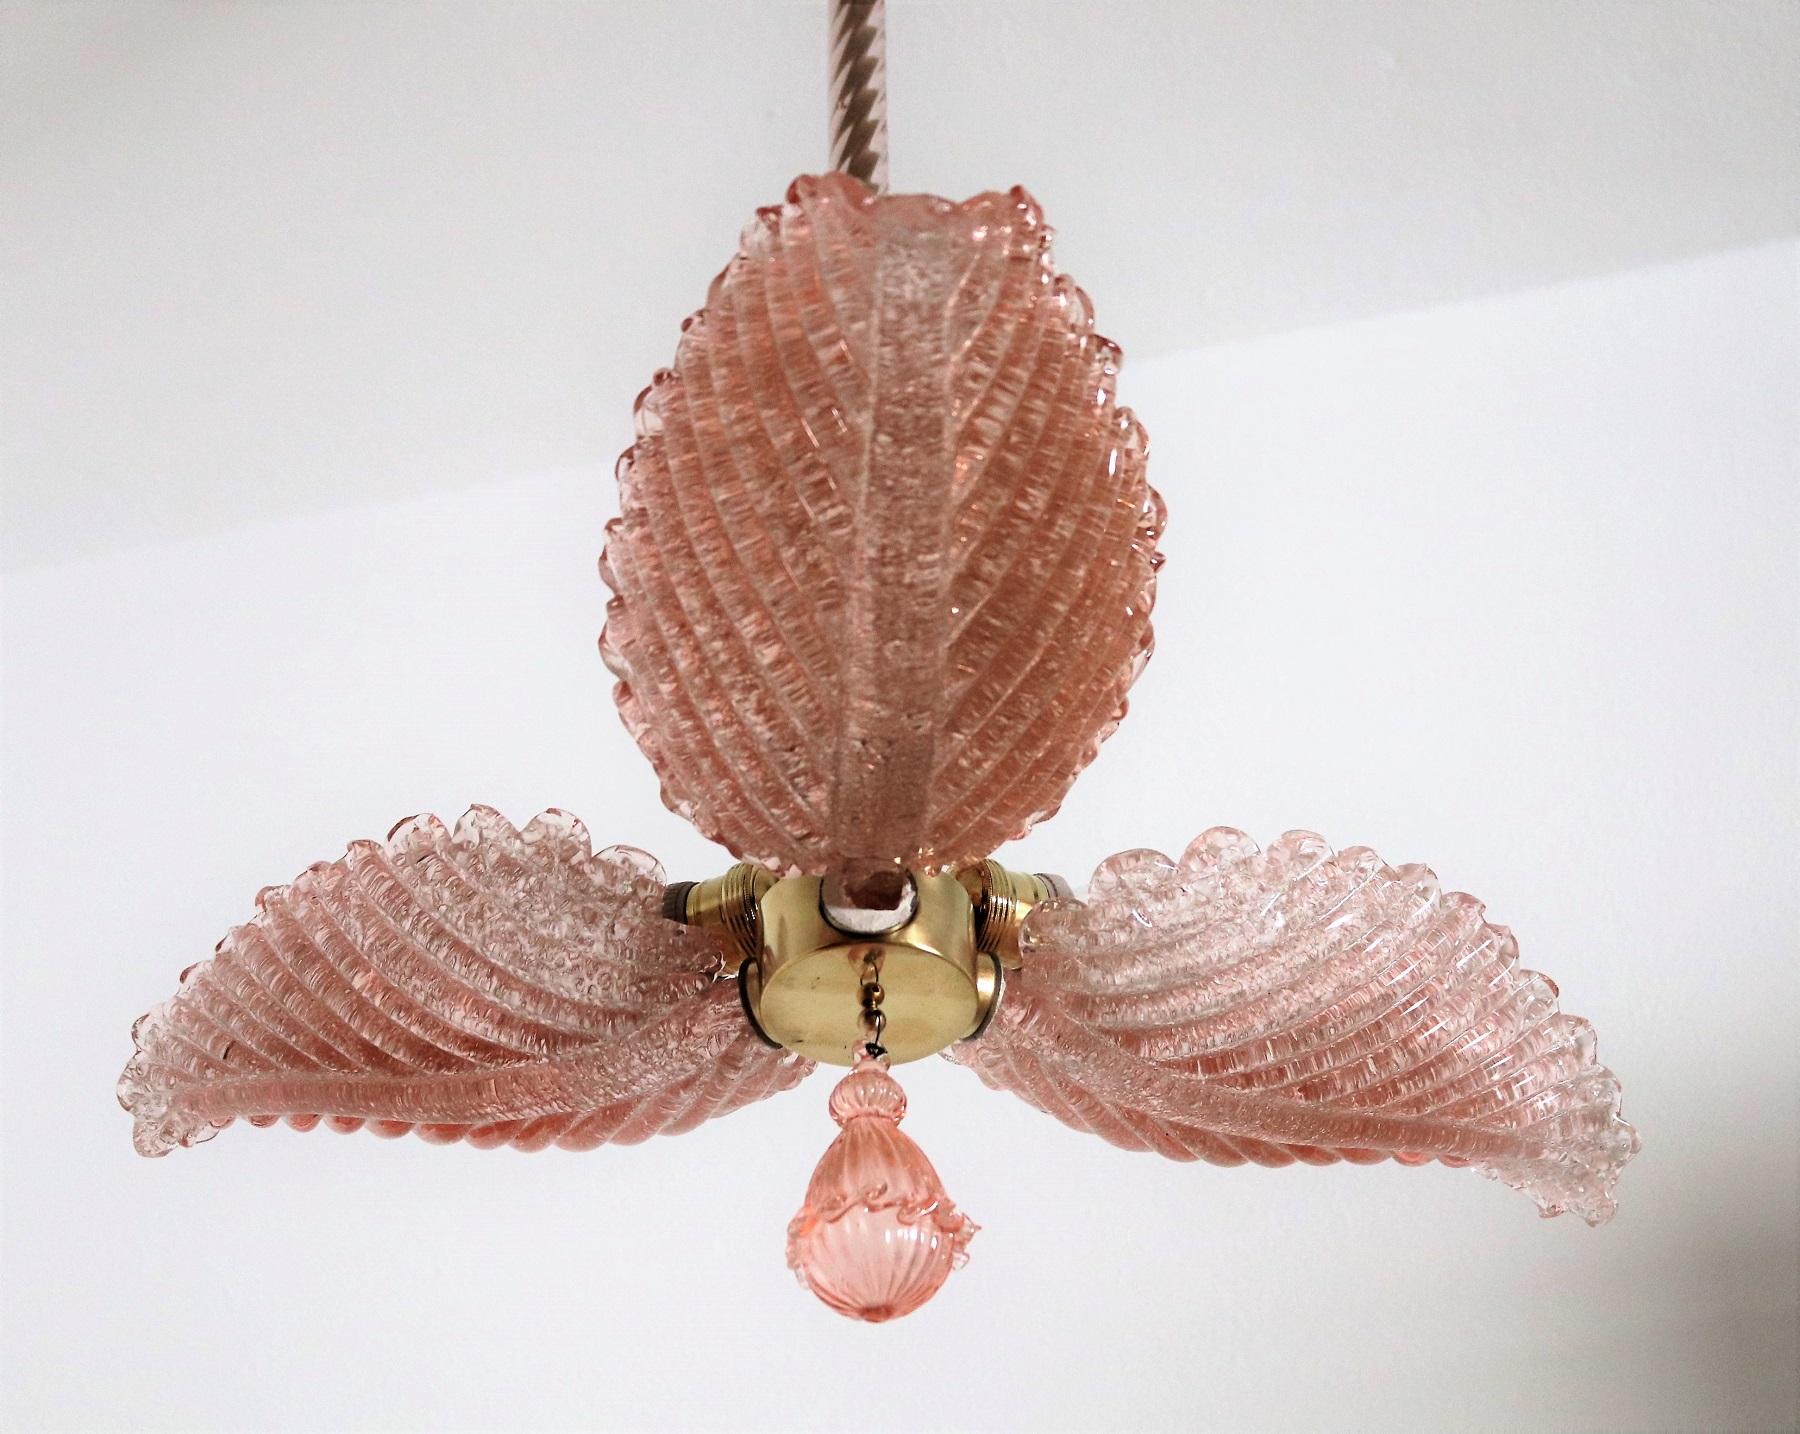 Magnificent and rare Italian chandelier handcrafted of pink or rose colored Murano glasses in the form of a flower. Below the chandelier a glass hanging detail typically for Venetian made Murano glass.
The glass petals are handmade and differ